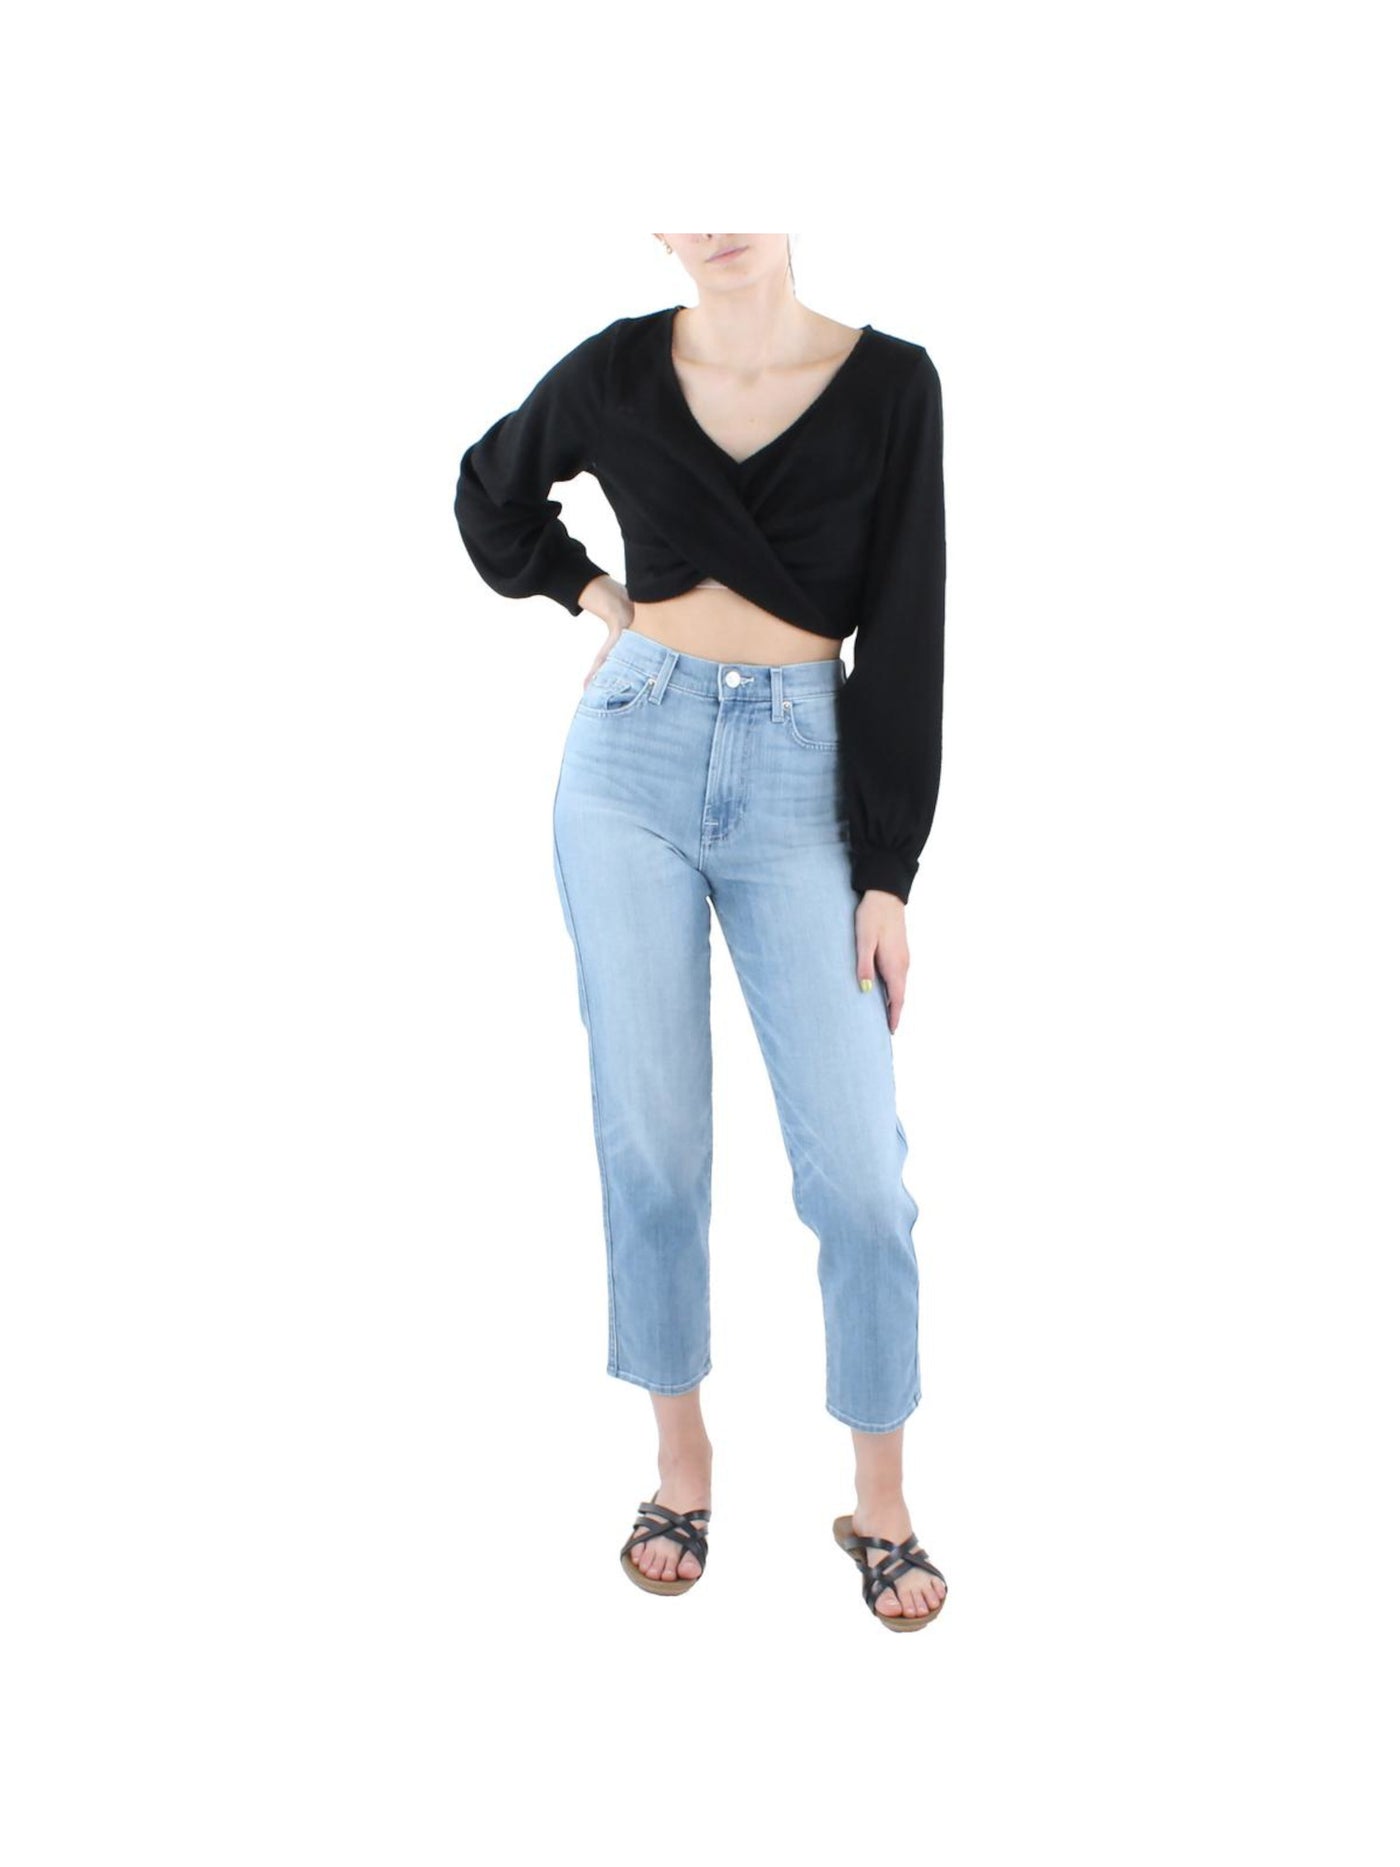 ALMOST FAMOUS Womens Black Ribbed Twist Front Long Sleeve V Neck Crop Top Juniors L